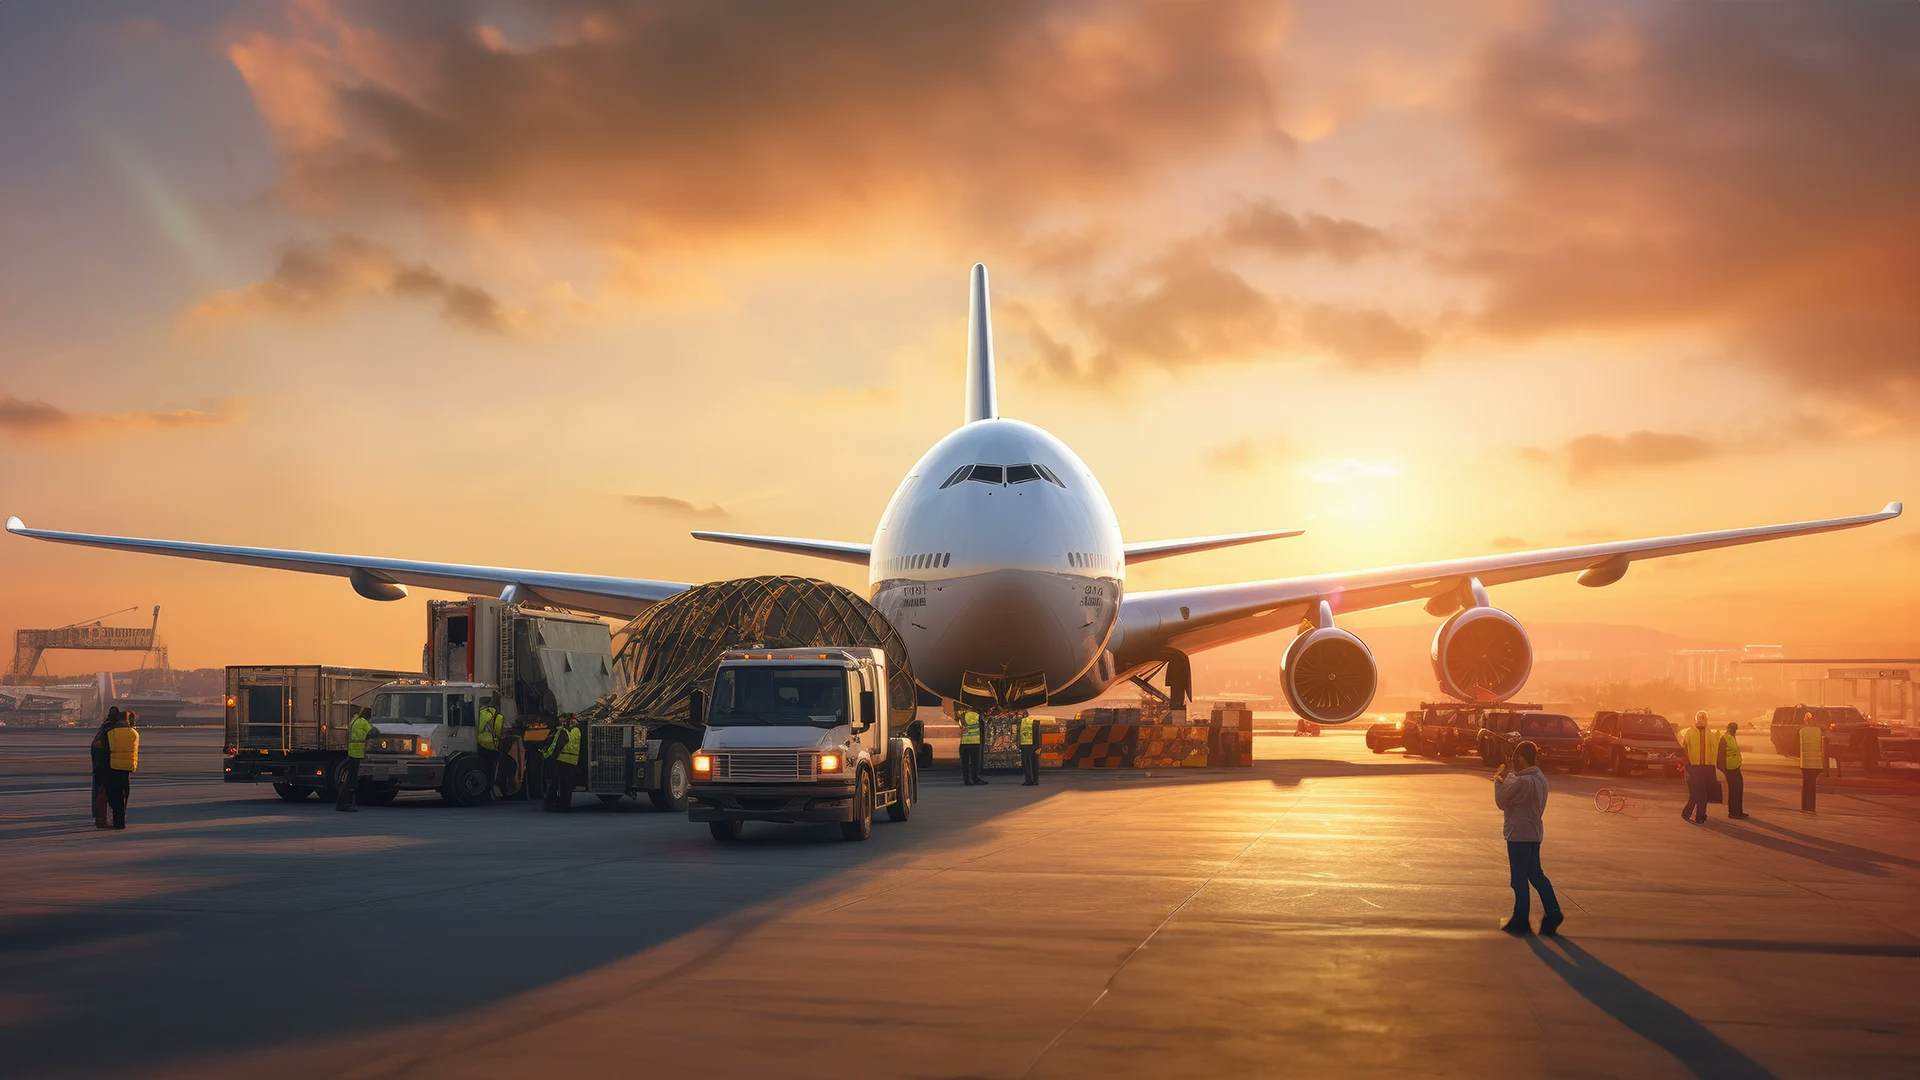 A majestic jumbo jet bathed in the warm glow of a setting sun commands the tarmac, while ground crew and vehicles busily prepare cargo for loading, reflecting the dynamic, bustling activity of air freight operations.